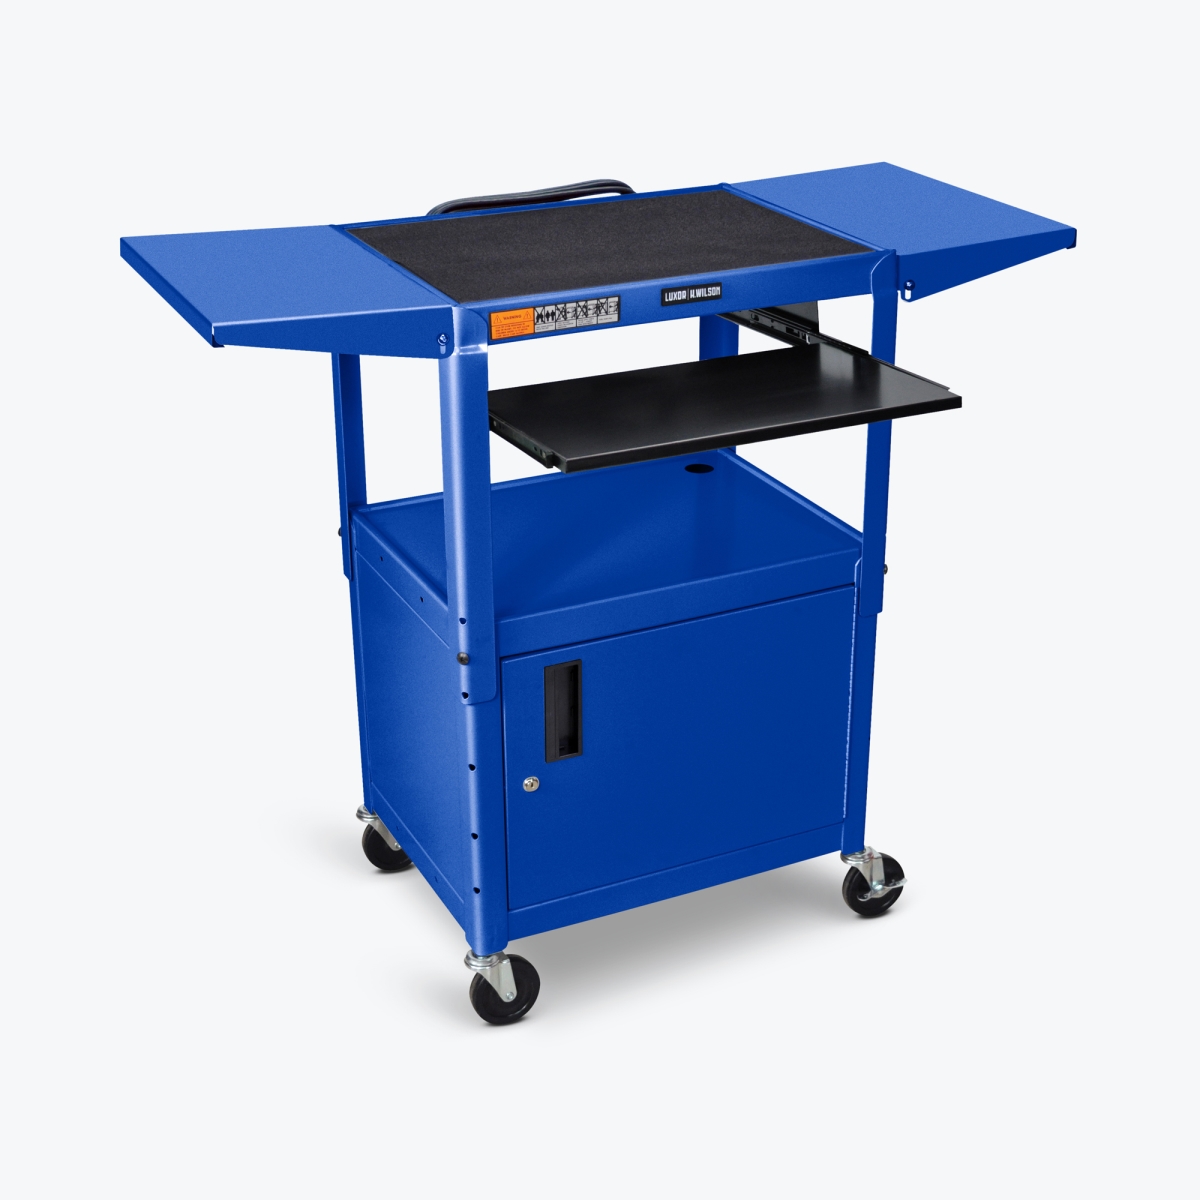 Picture of Luxor AVJ42KBCDL-RB Adjustable Height Steel AV Cart with Pullout Keyboard Tray Drop Leaf Cabinet, Blue